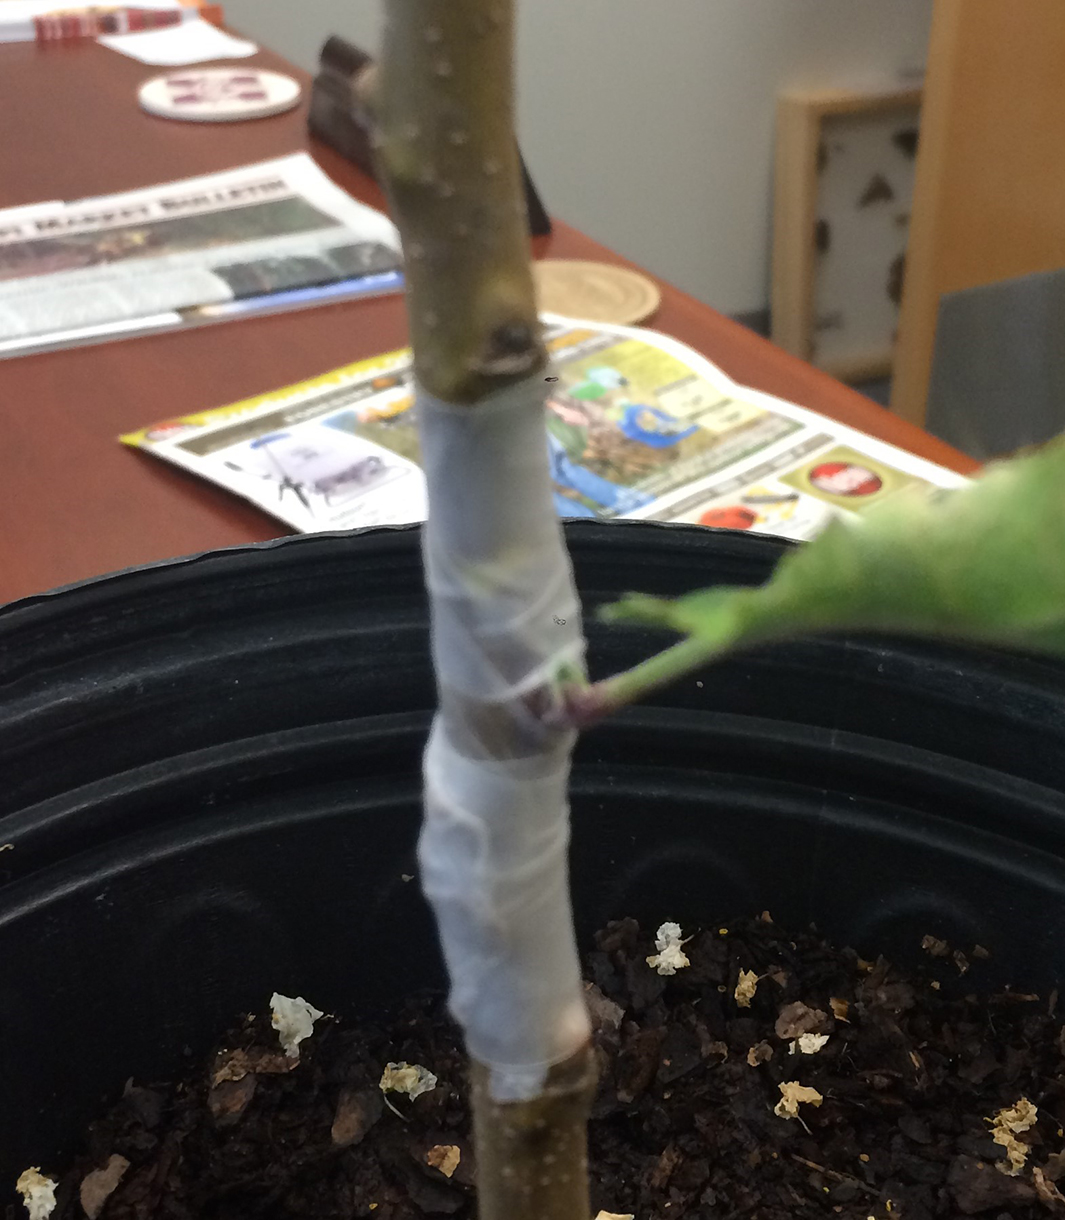 The plant trunk and newly grafted stem are wrapped with tape.